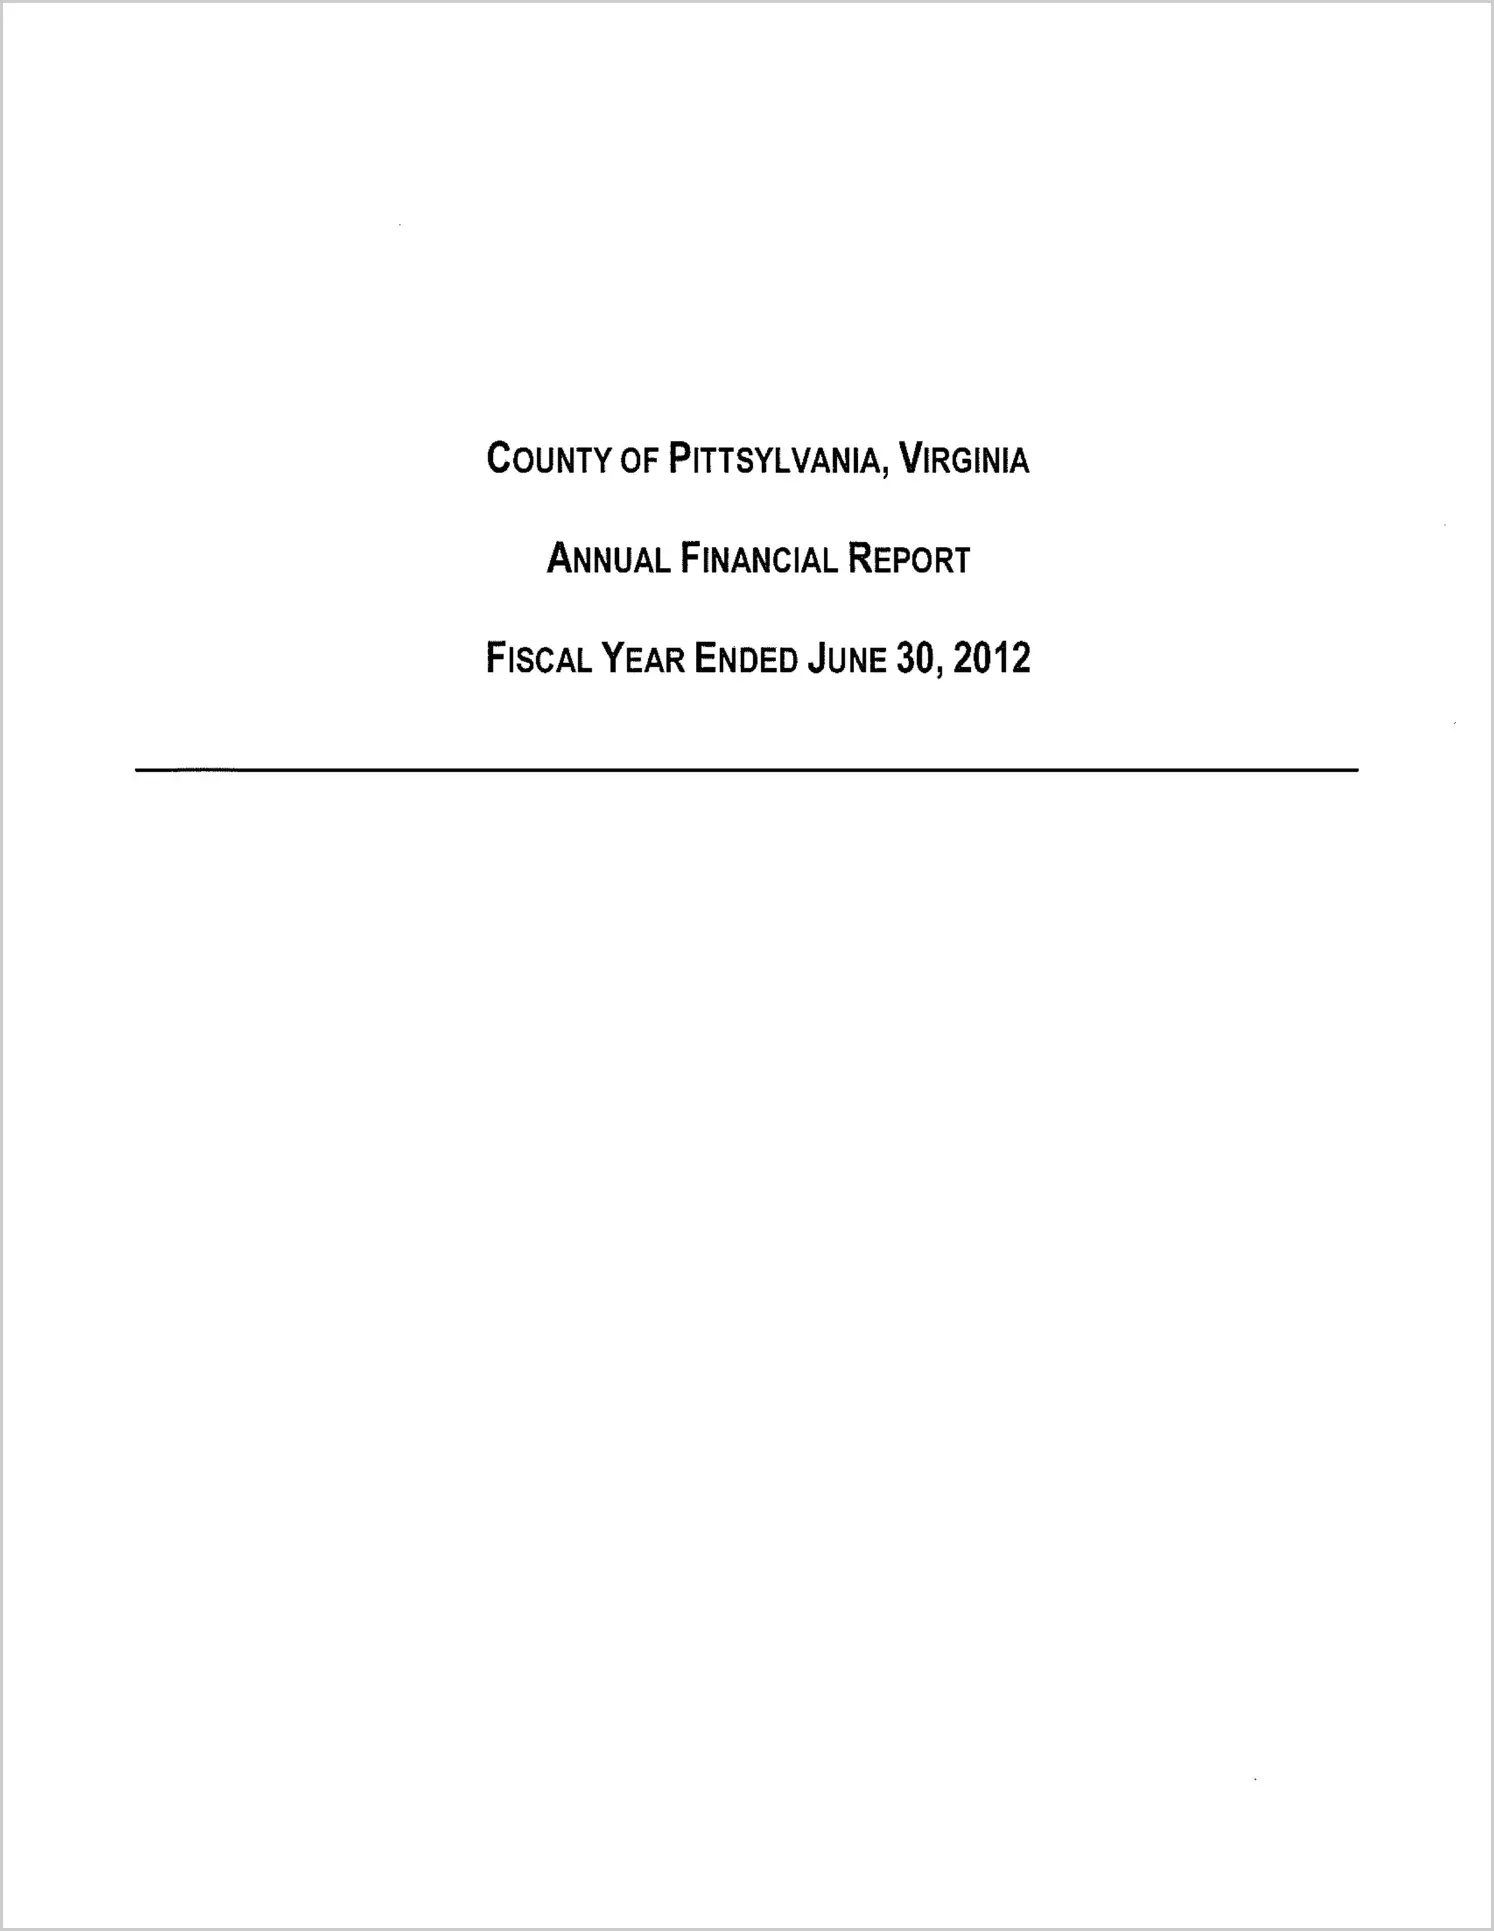 2012 Annual Financial Report for County of Pittsylvania